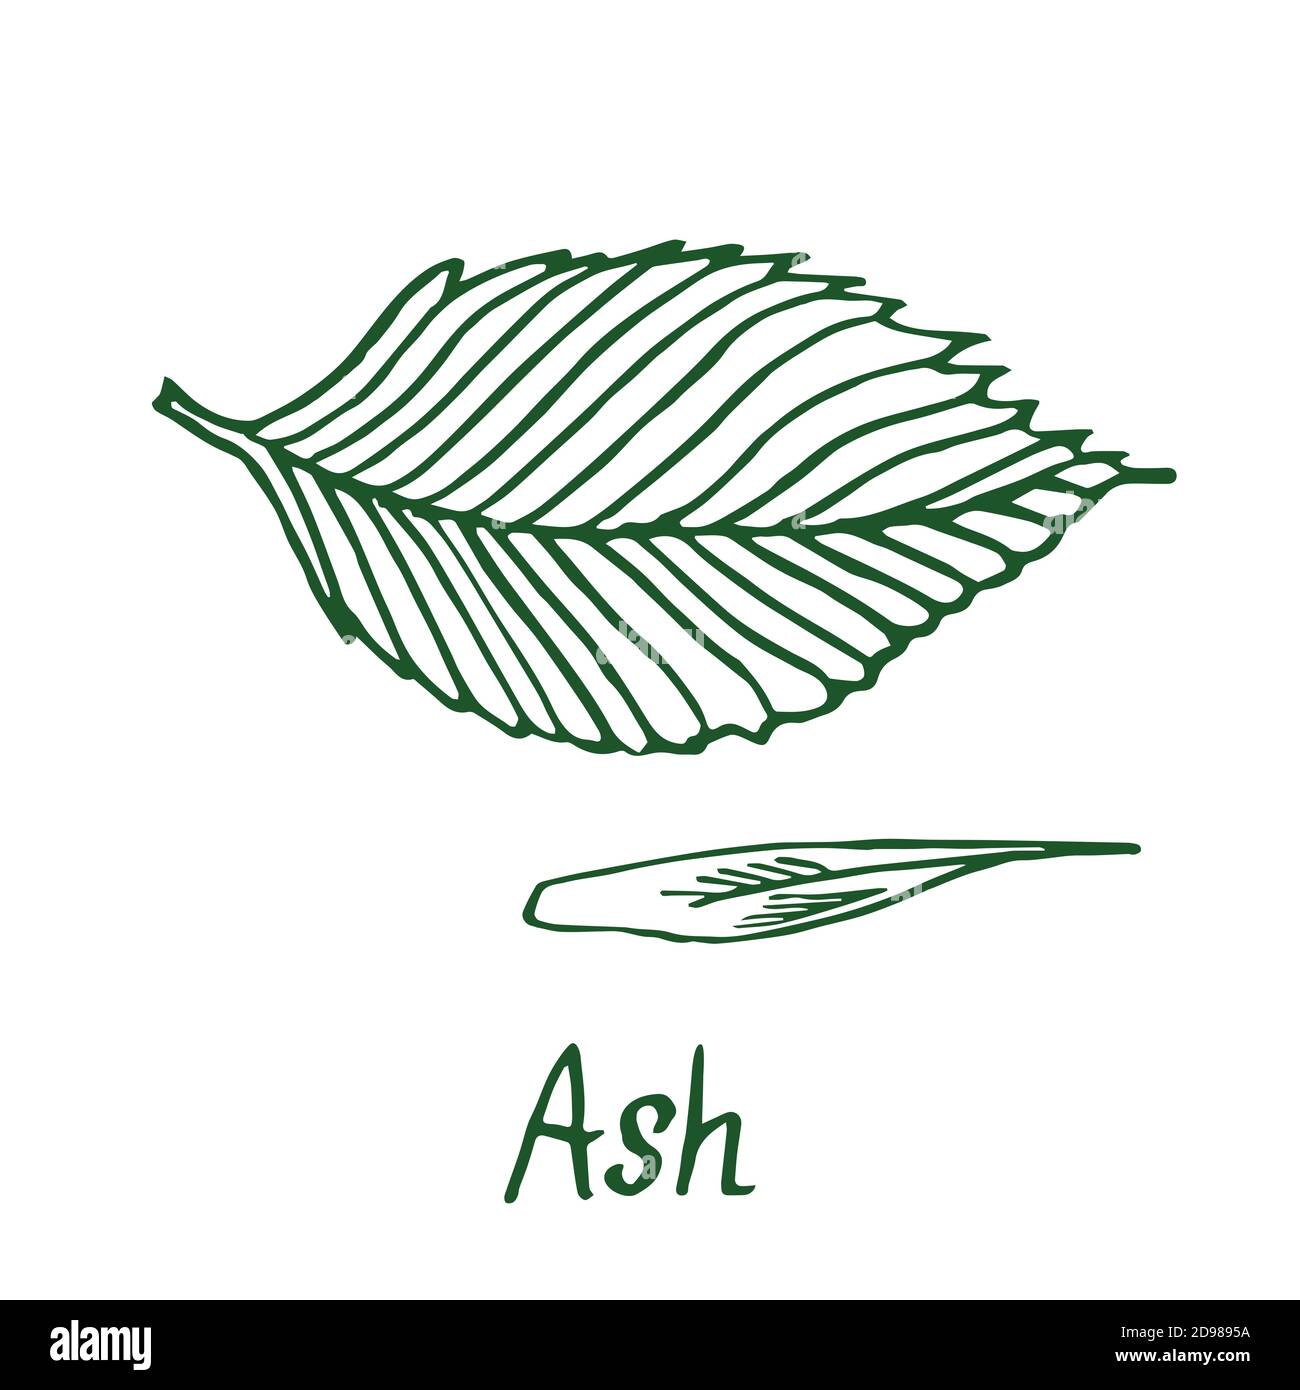 Ash tree (Fraxinus) leaf and seed, hand drawn doodle, sketch in woodcut style, illustration Stock Photo